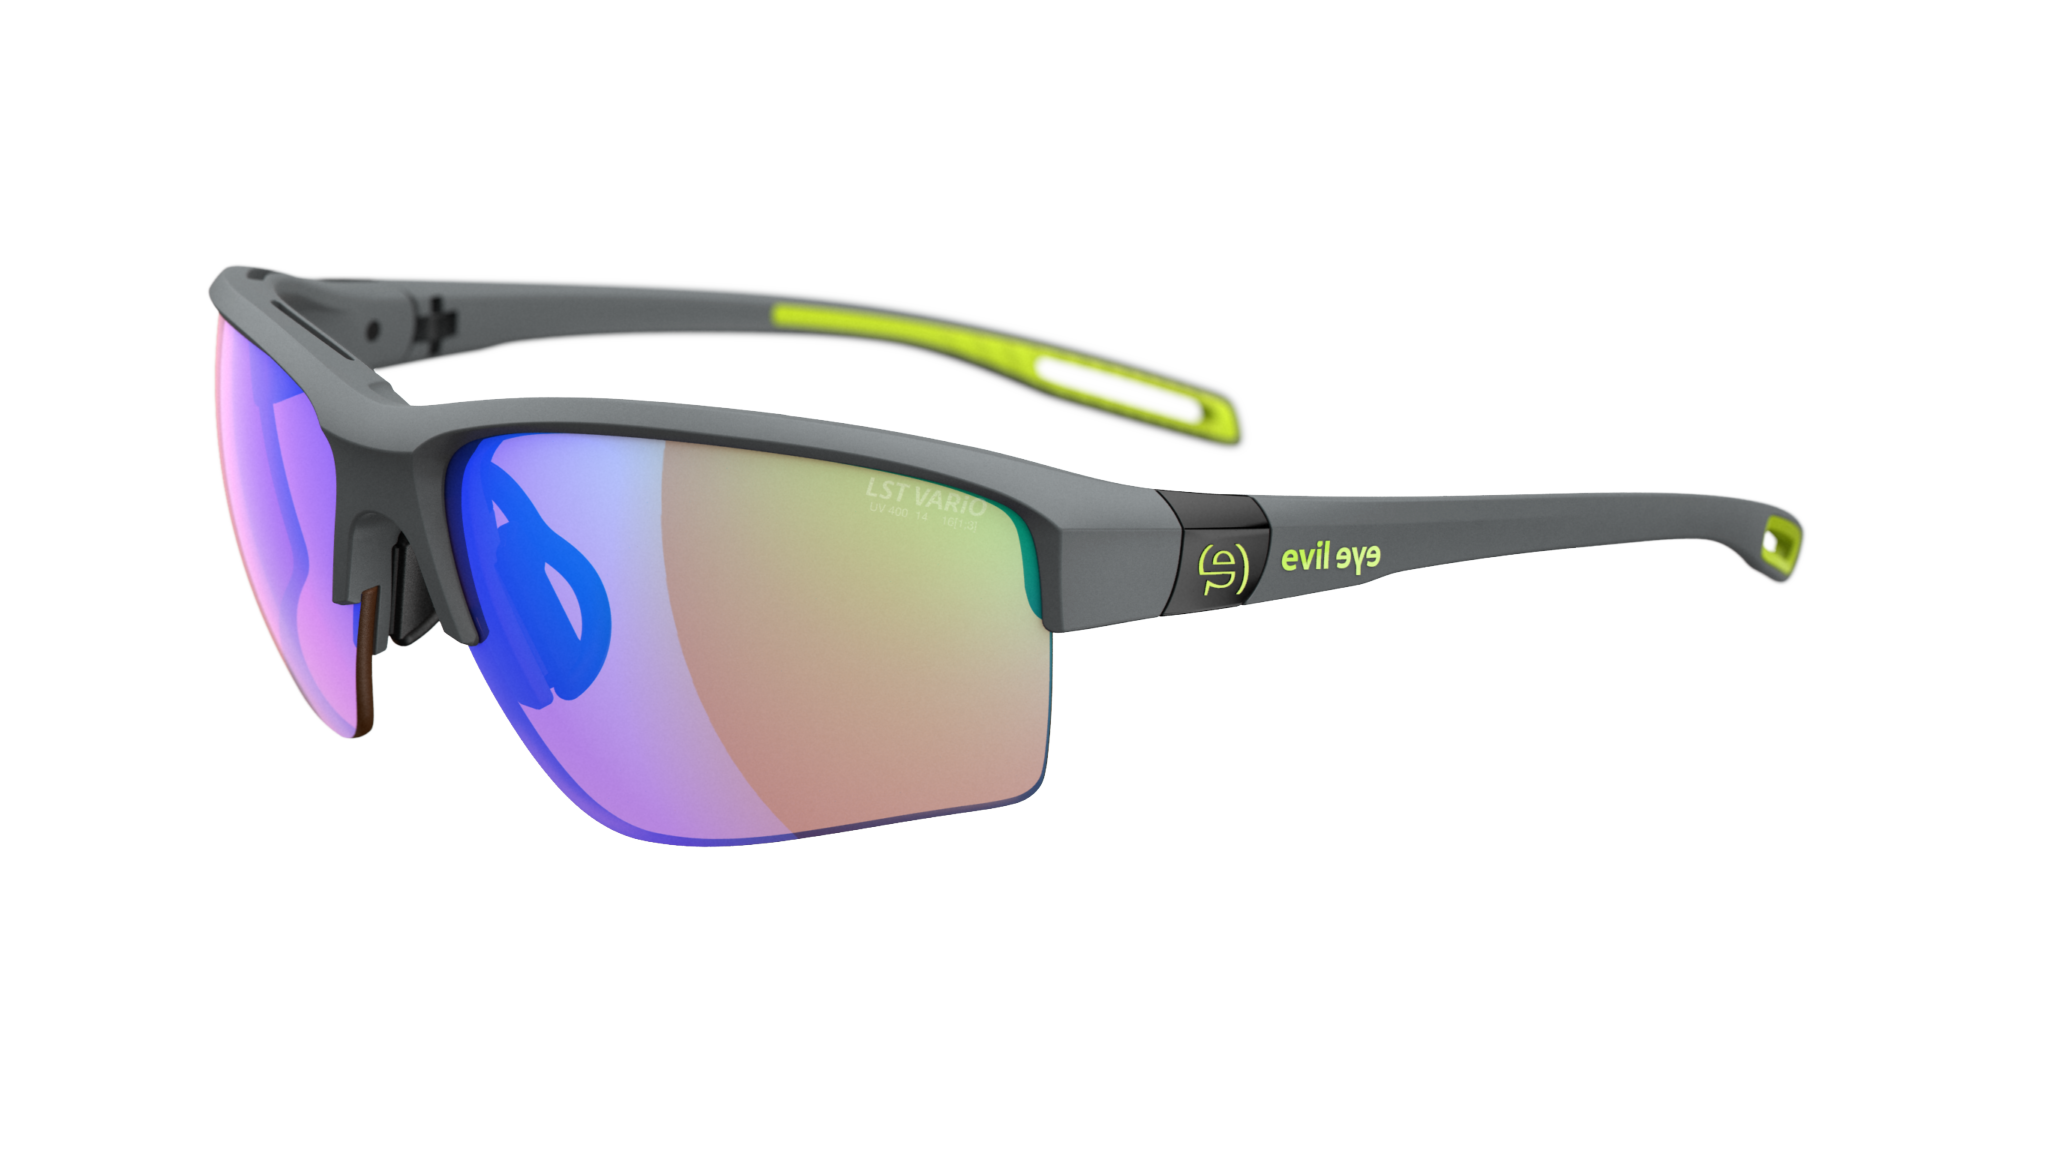 purchase traileye ng pro sports glasses online